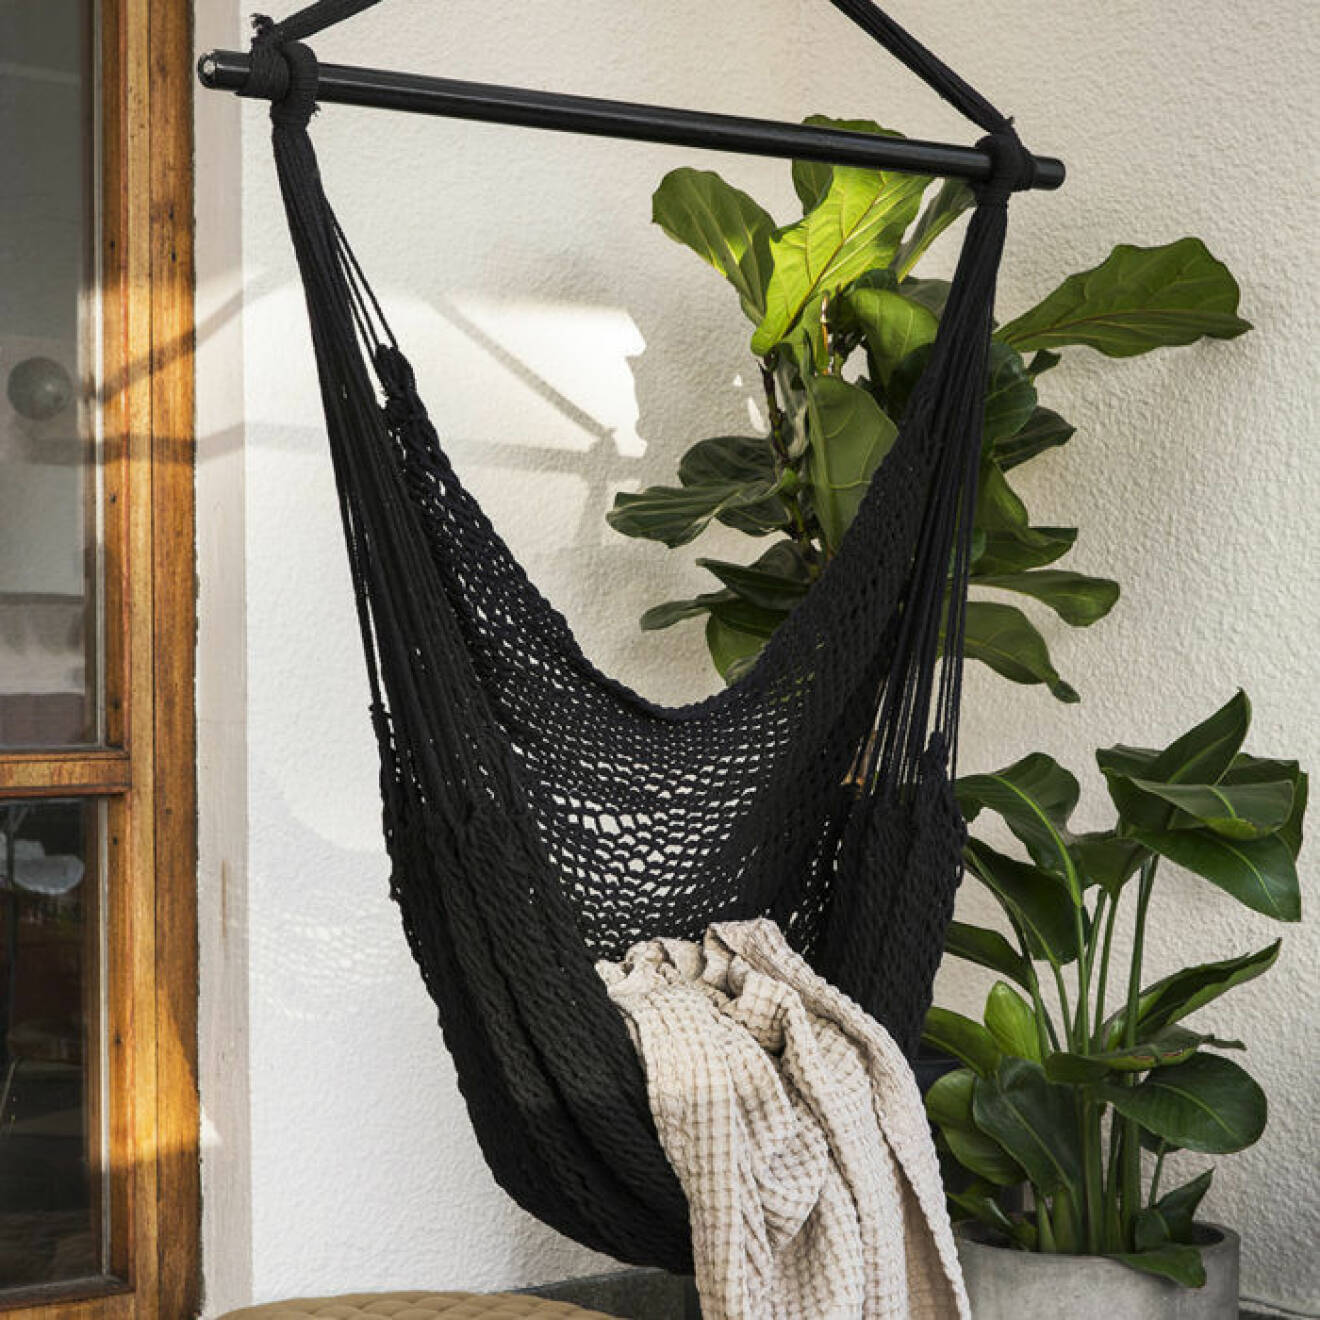 Cosy hanging chair at the balcony.